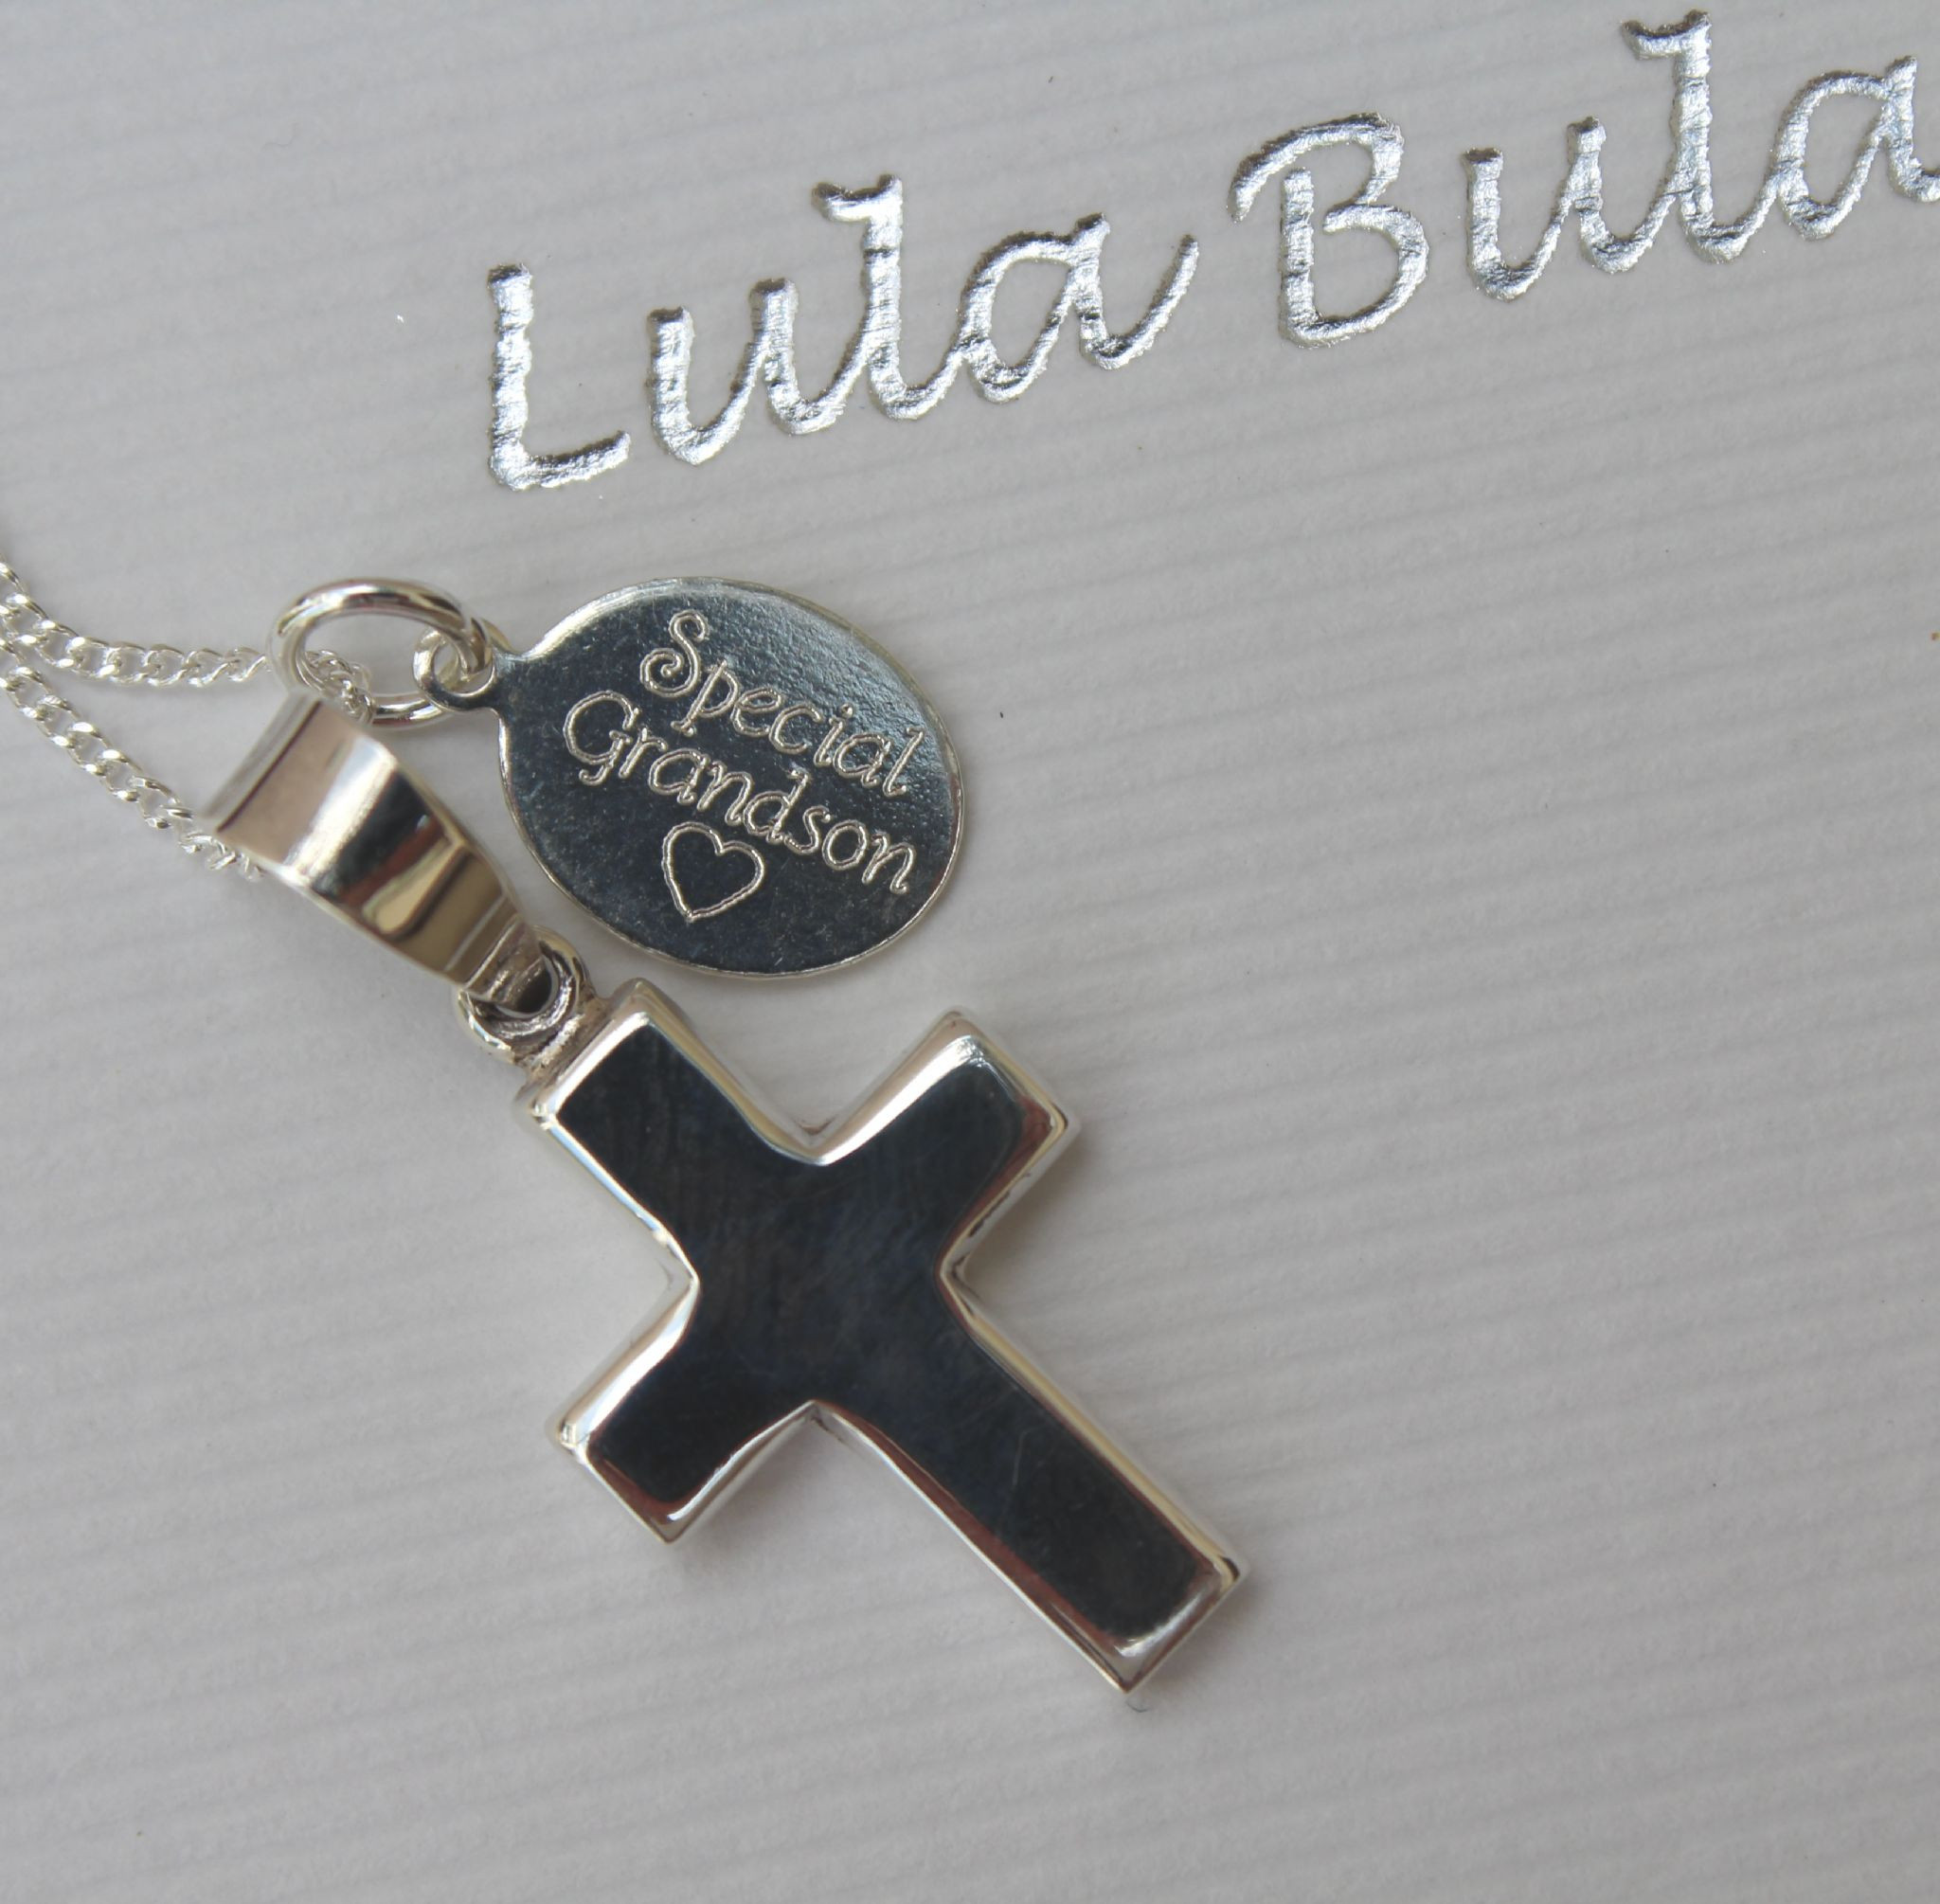 Boys Communion Gift Ideas
 First Holy munion boy s t with personalised tag necklace